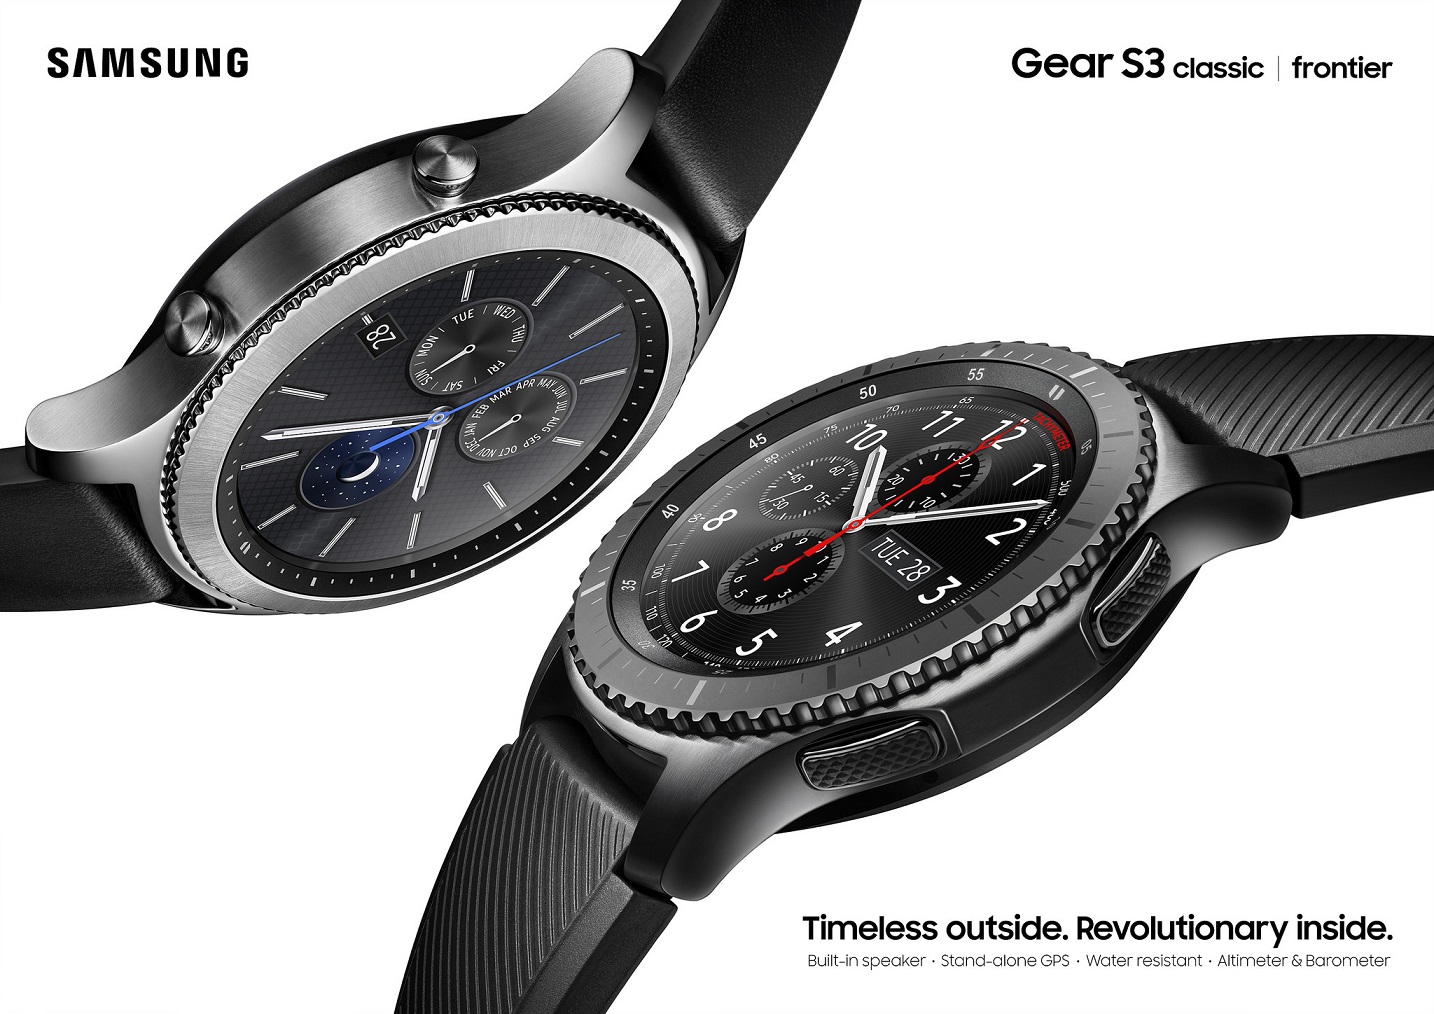 Samsung Expects Gear S3 to Increase Smartwatch Sales by 60%, May Launch End of October